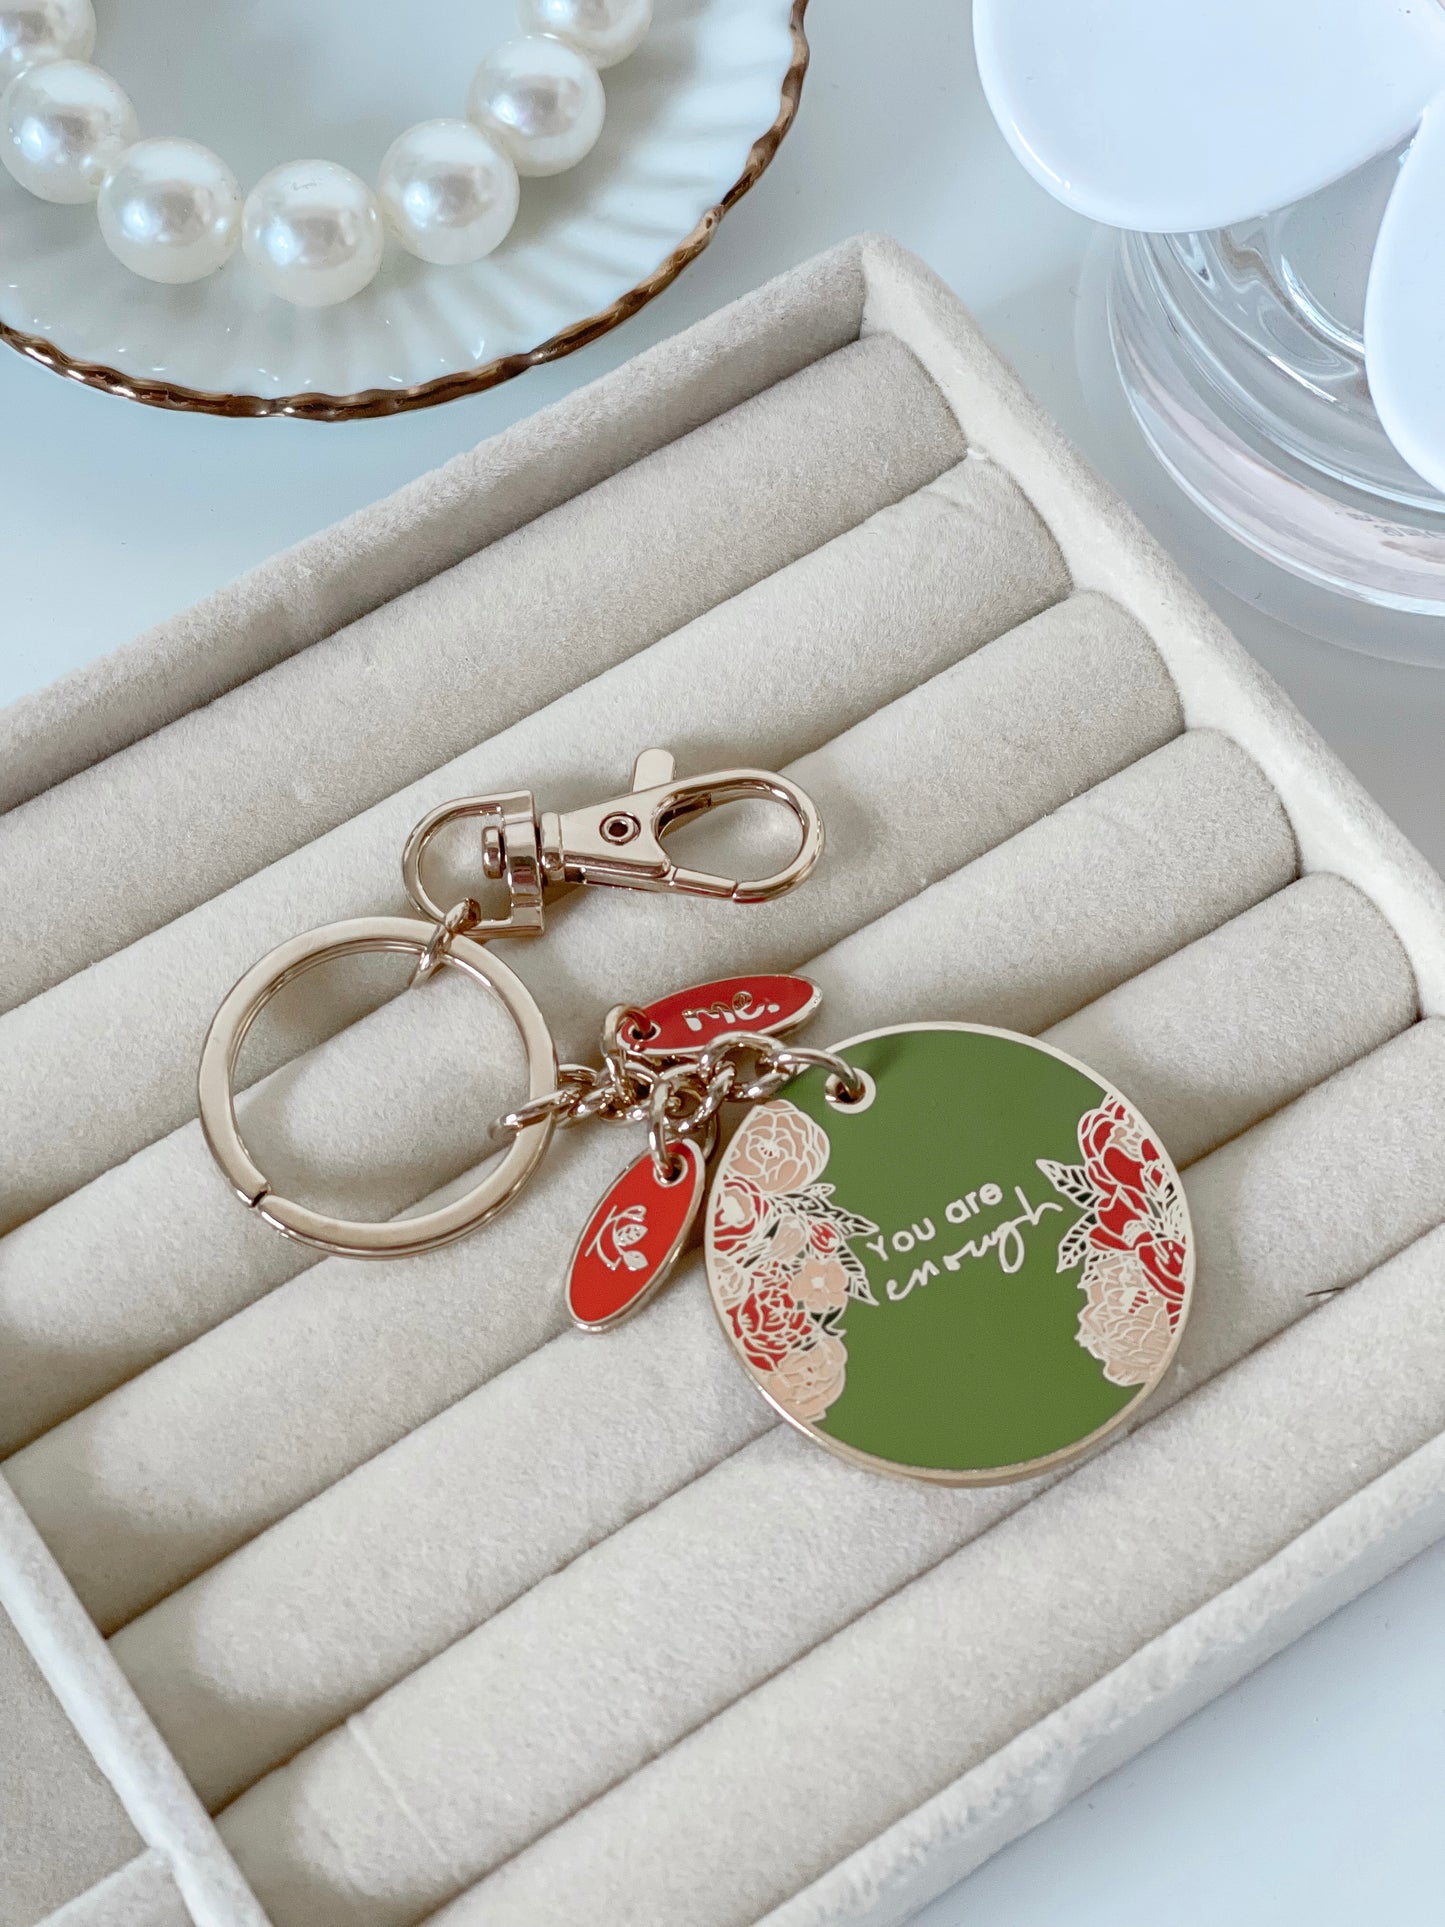 Green and Gold You are Enough Circular Keyring. Trendy pretty accessory